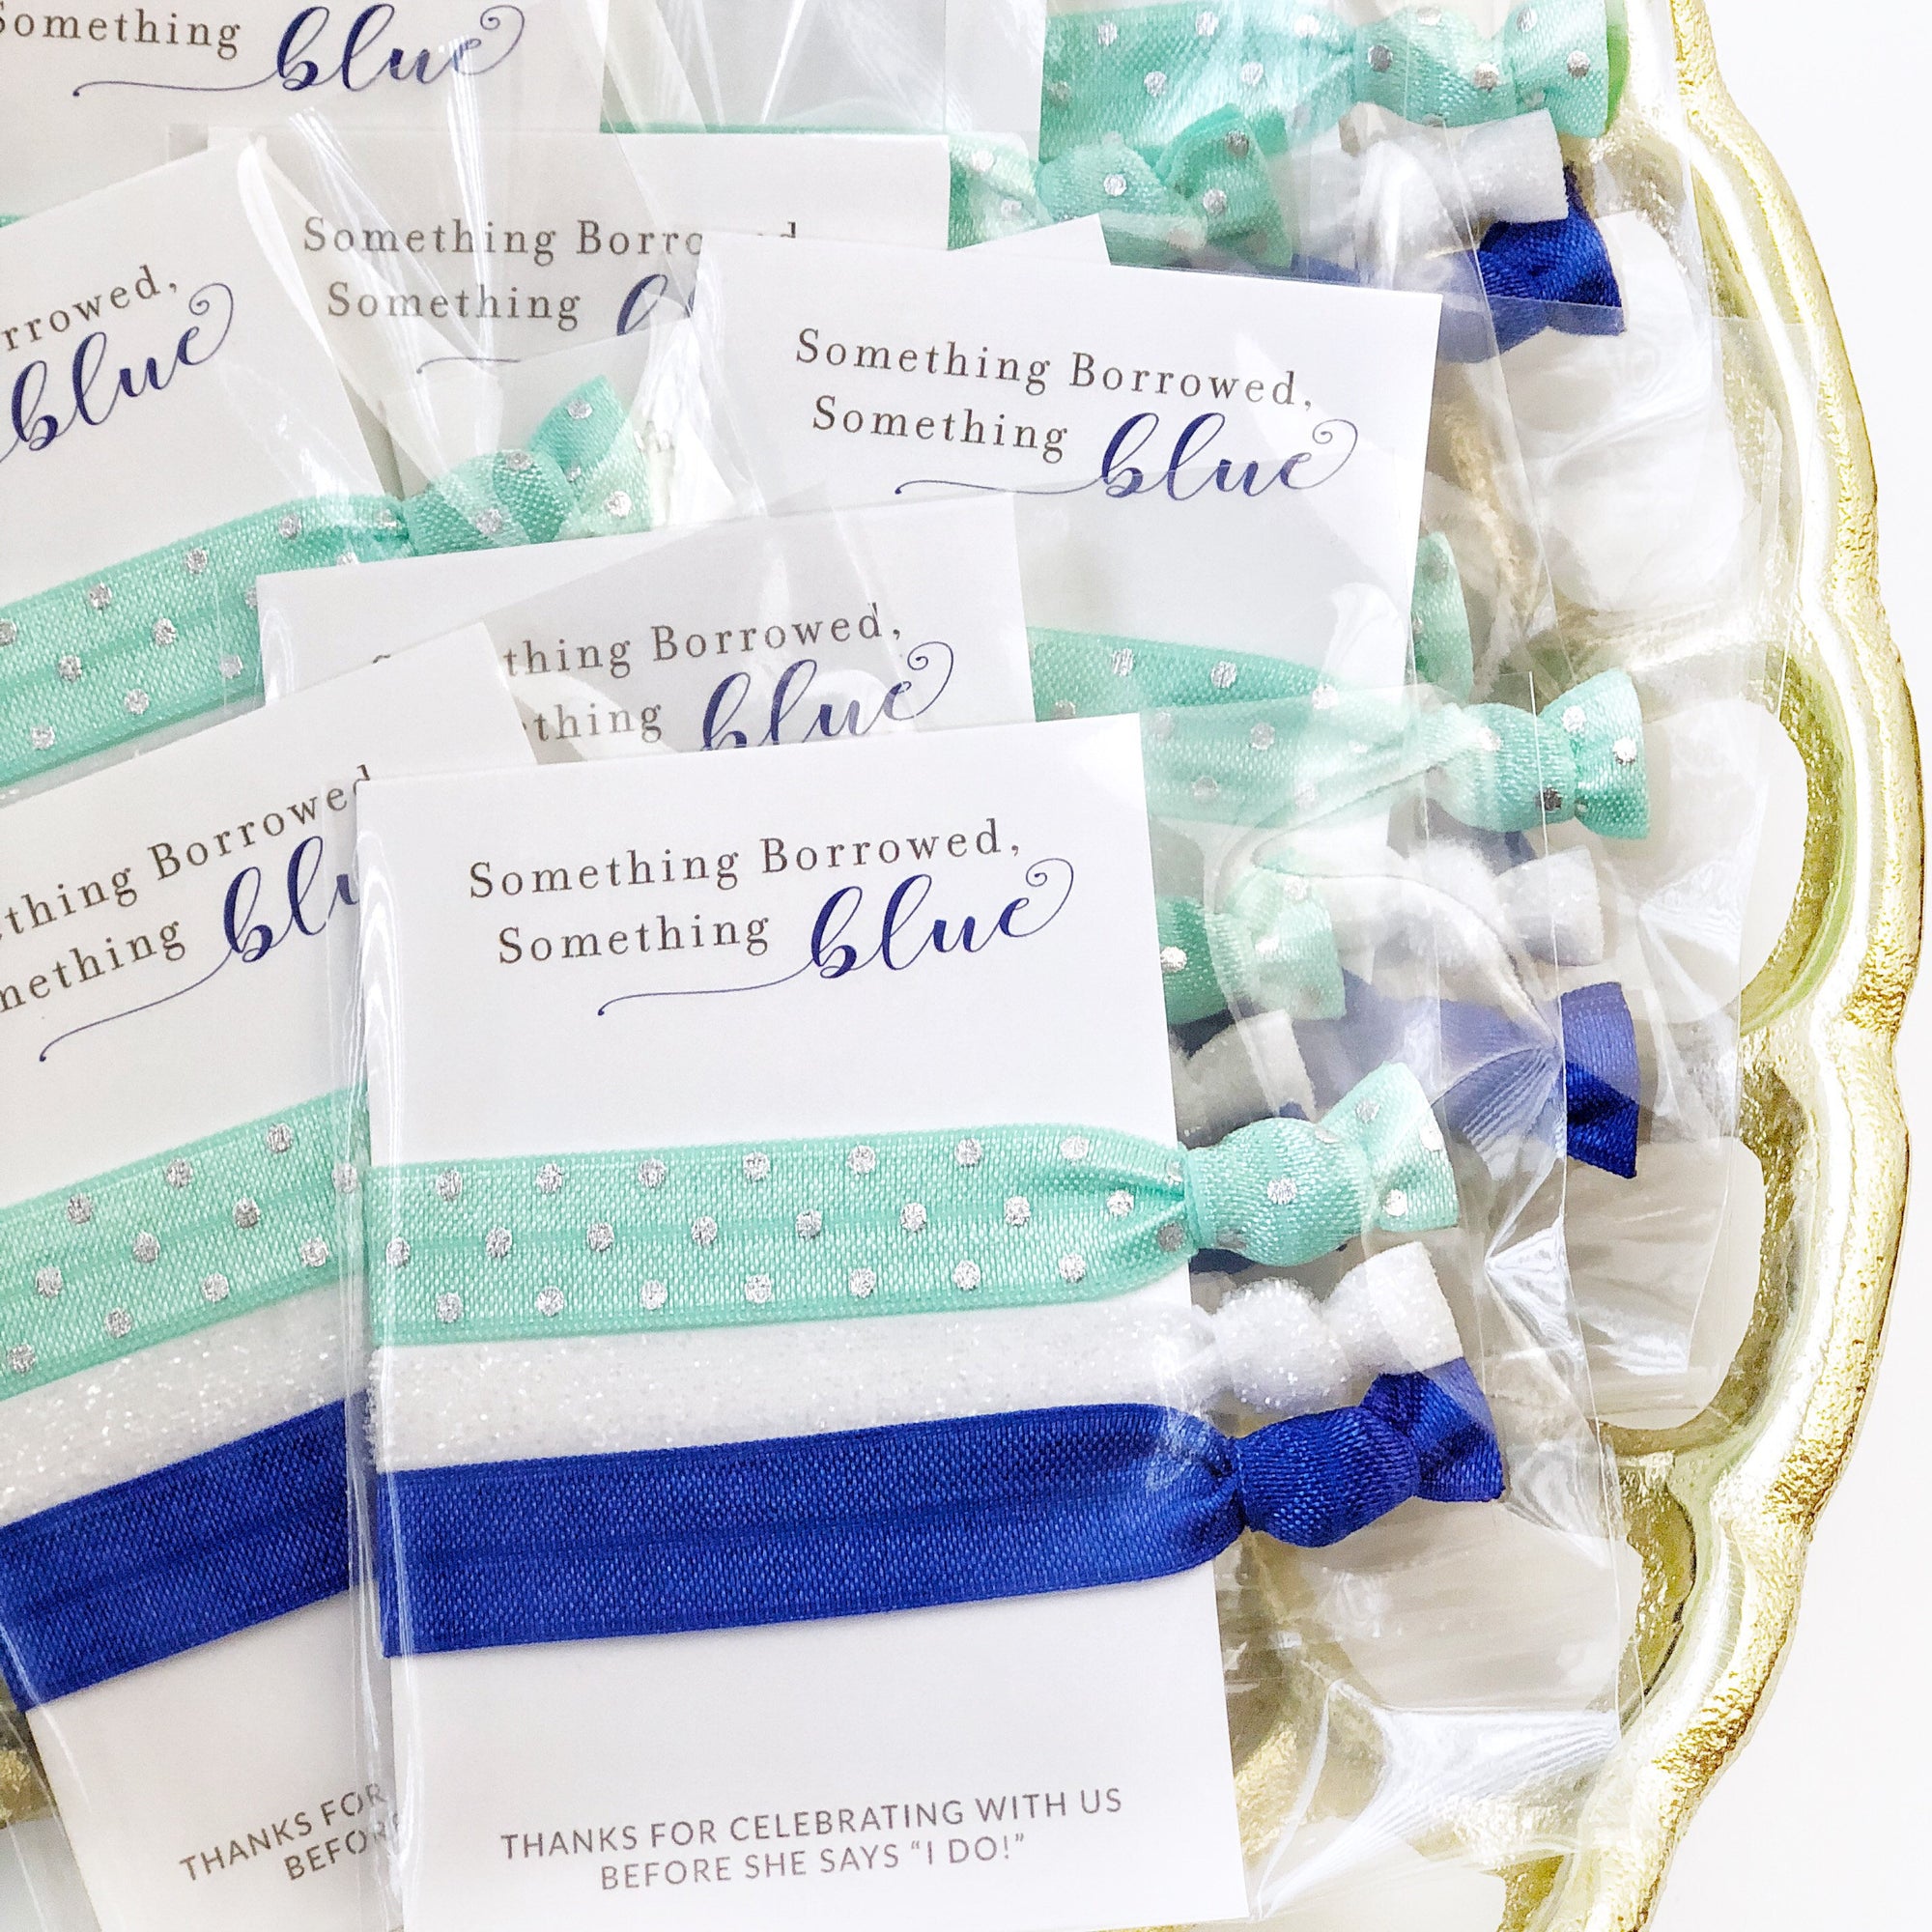 Something Blue Bridal Shower and Bachelorette Party Favors - Small Gifts - @PlumPolkaDot 